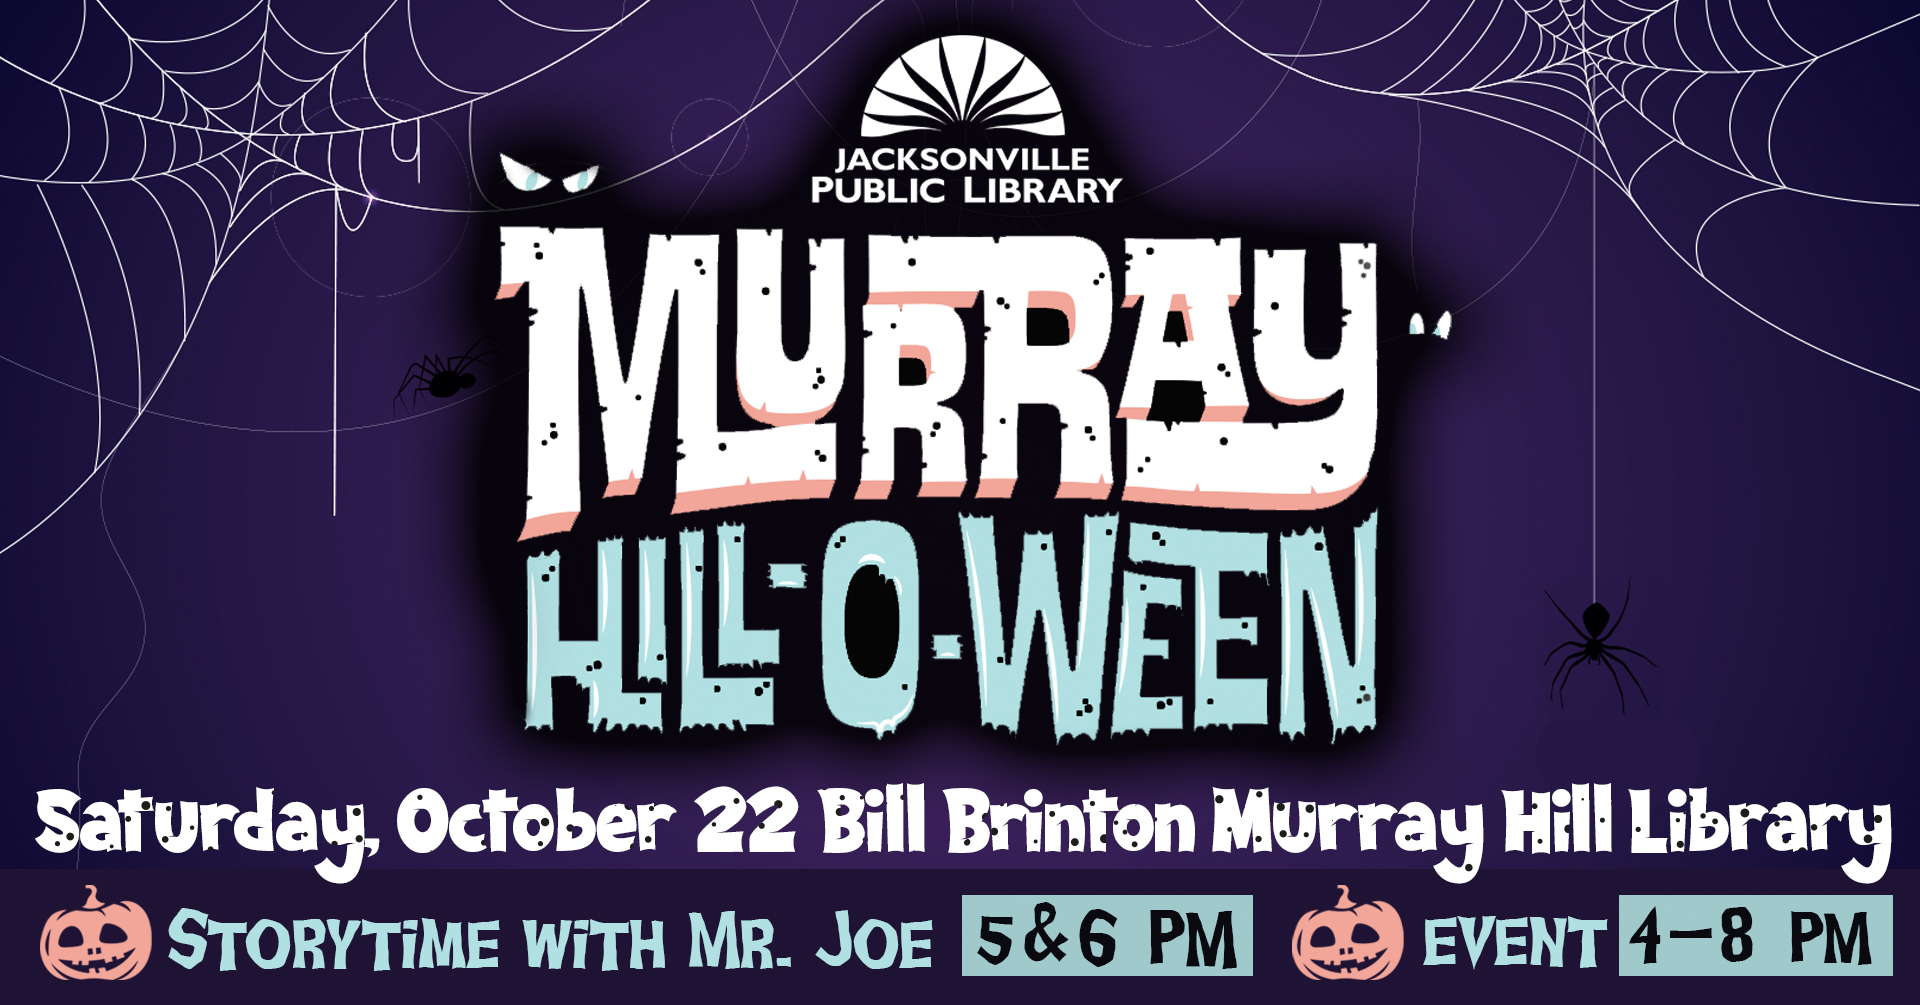 Murray Hill-O-Ween at the Bill Brinton Murray Hill Library!